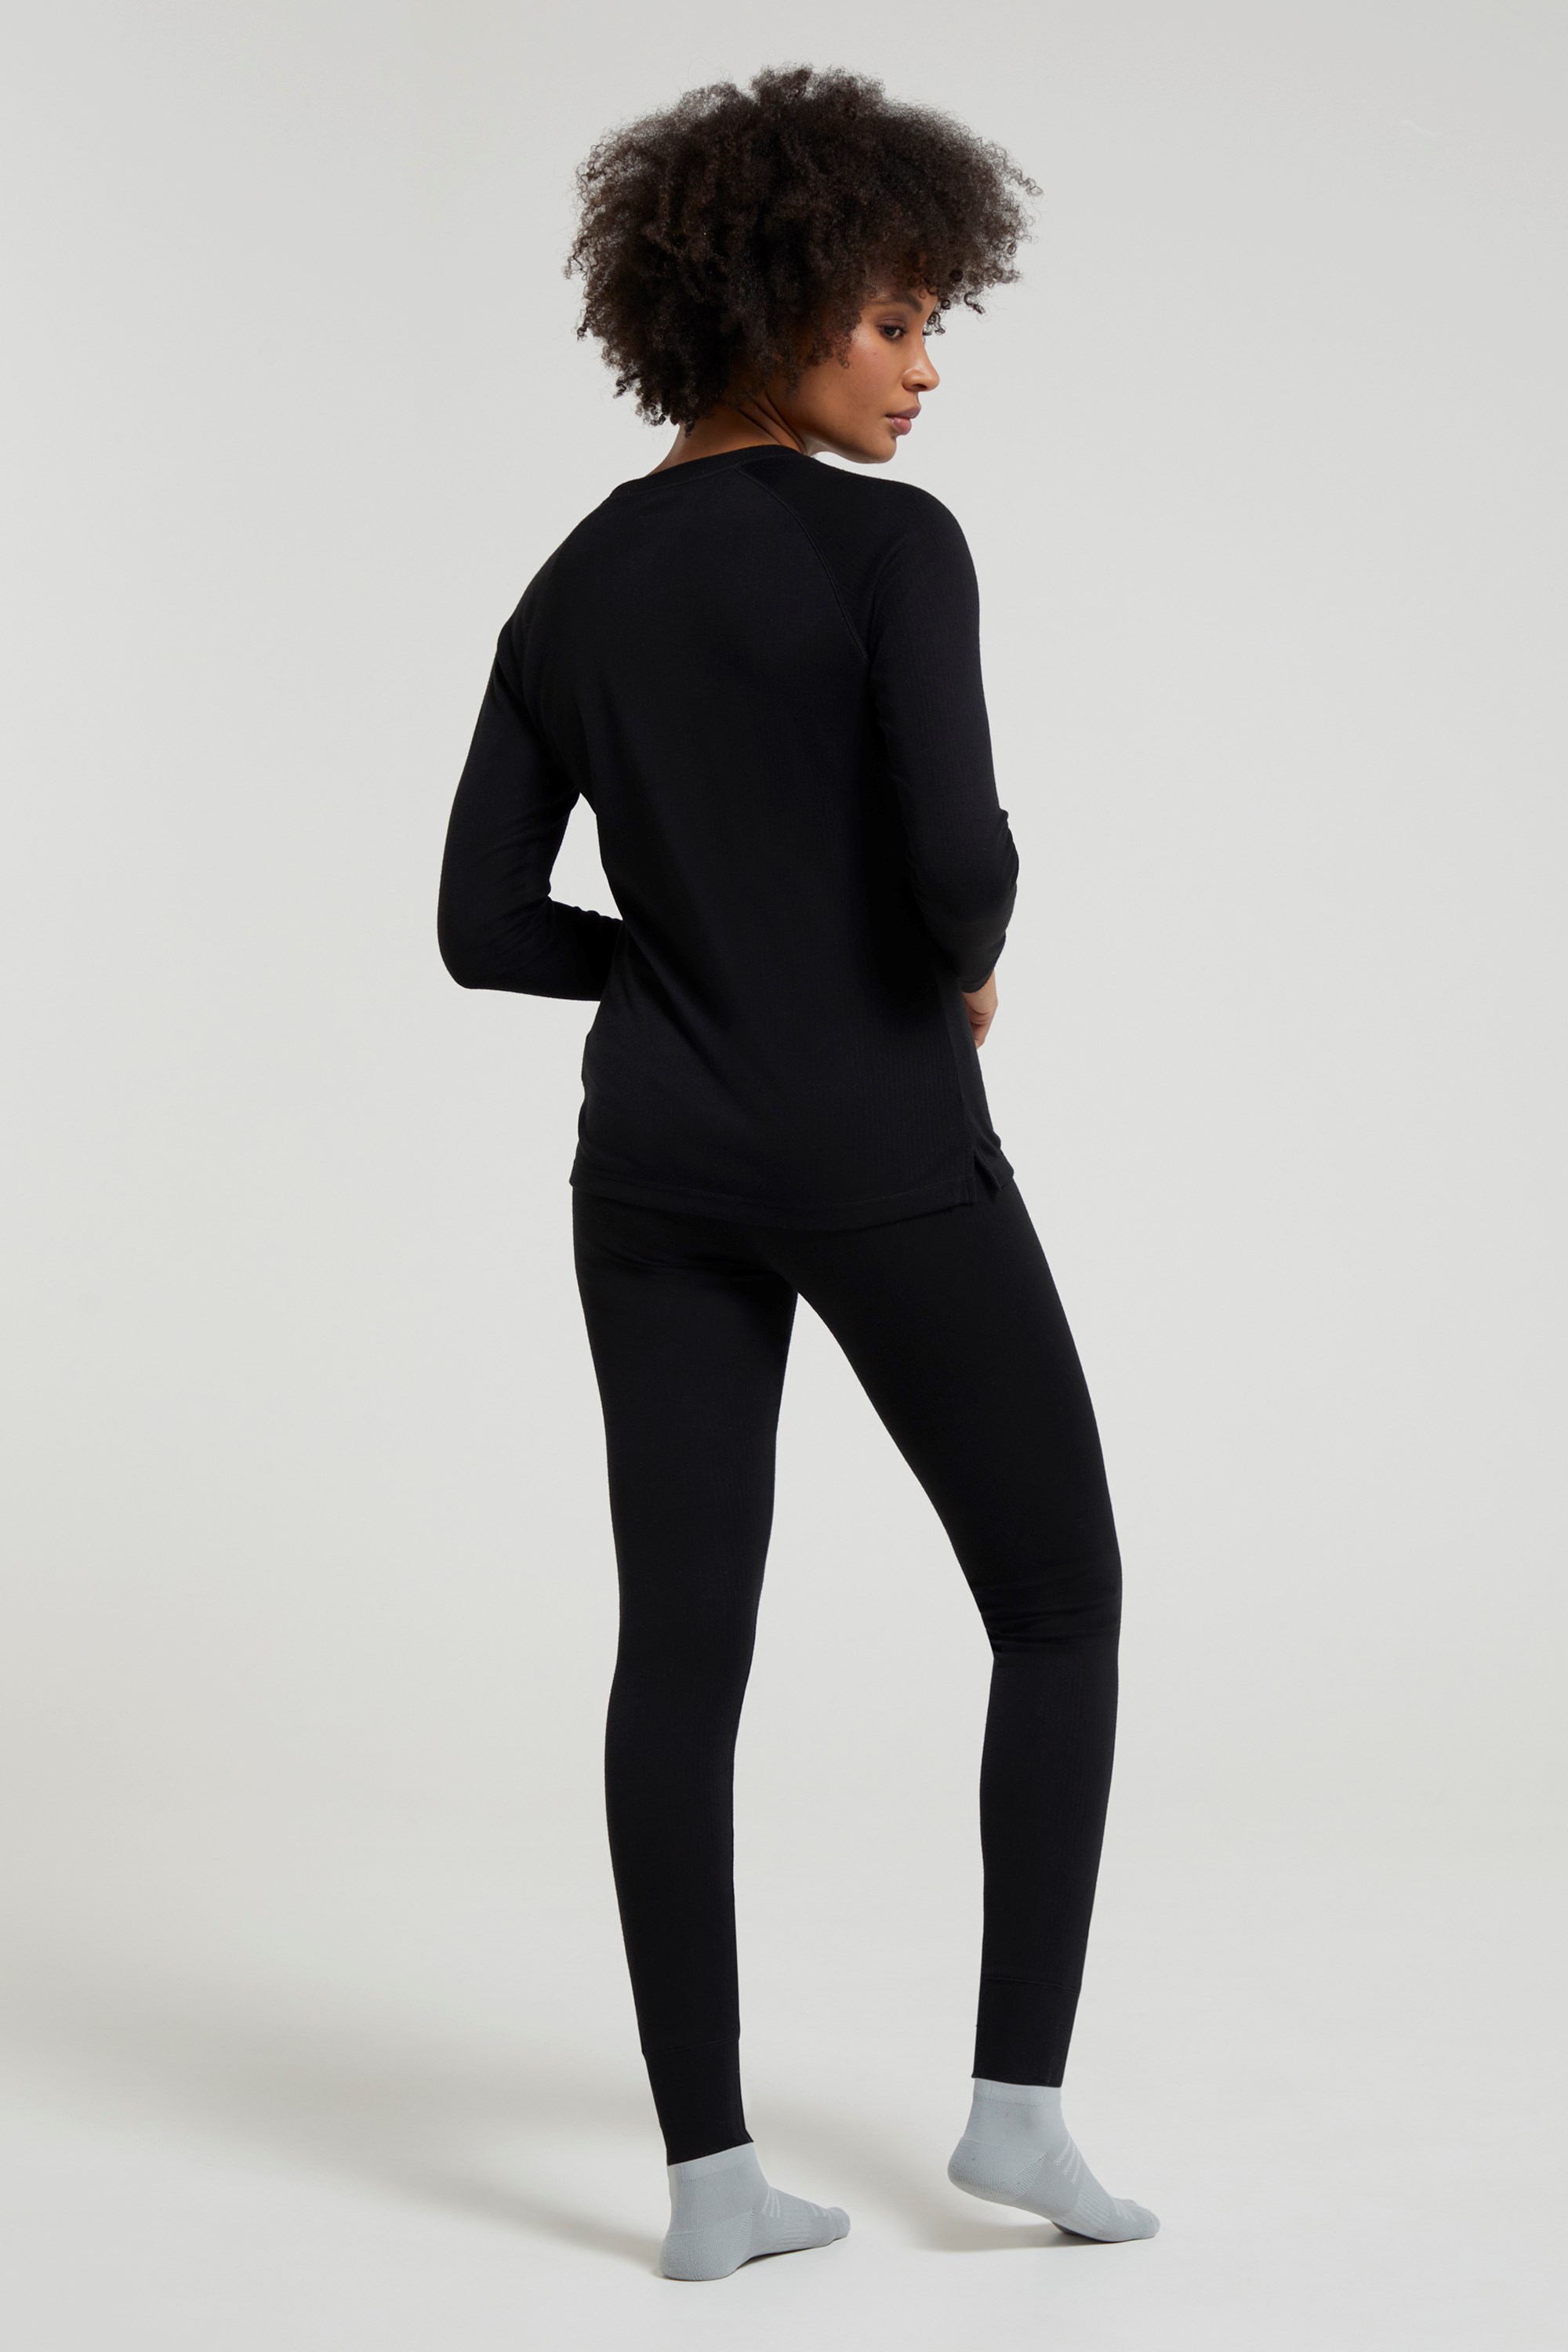 Buy Mountain Warehouse Talus Thermal Leggings Multipack from the